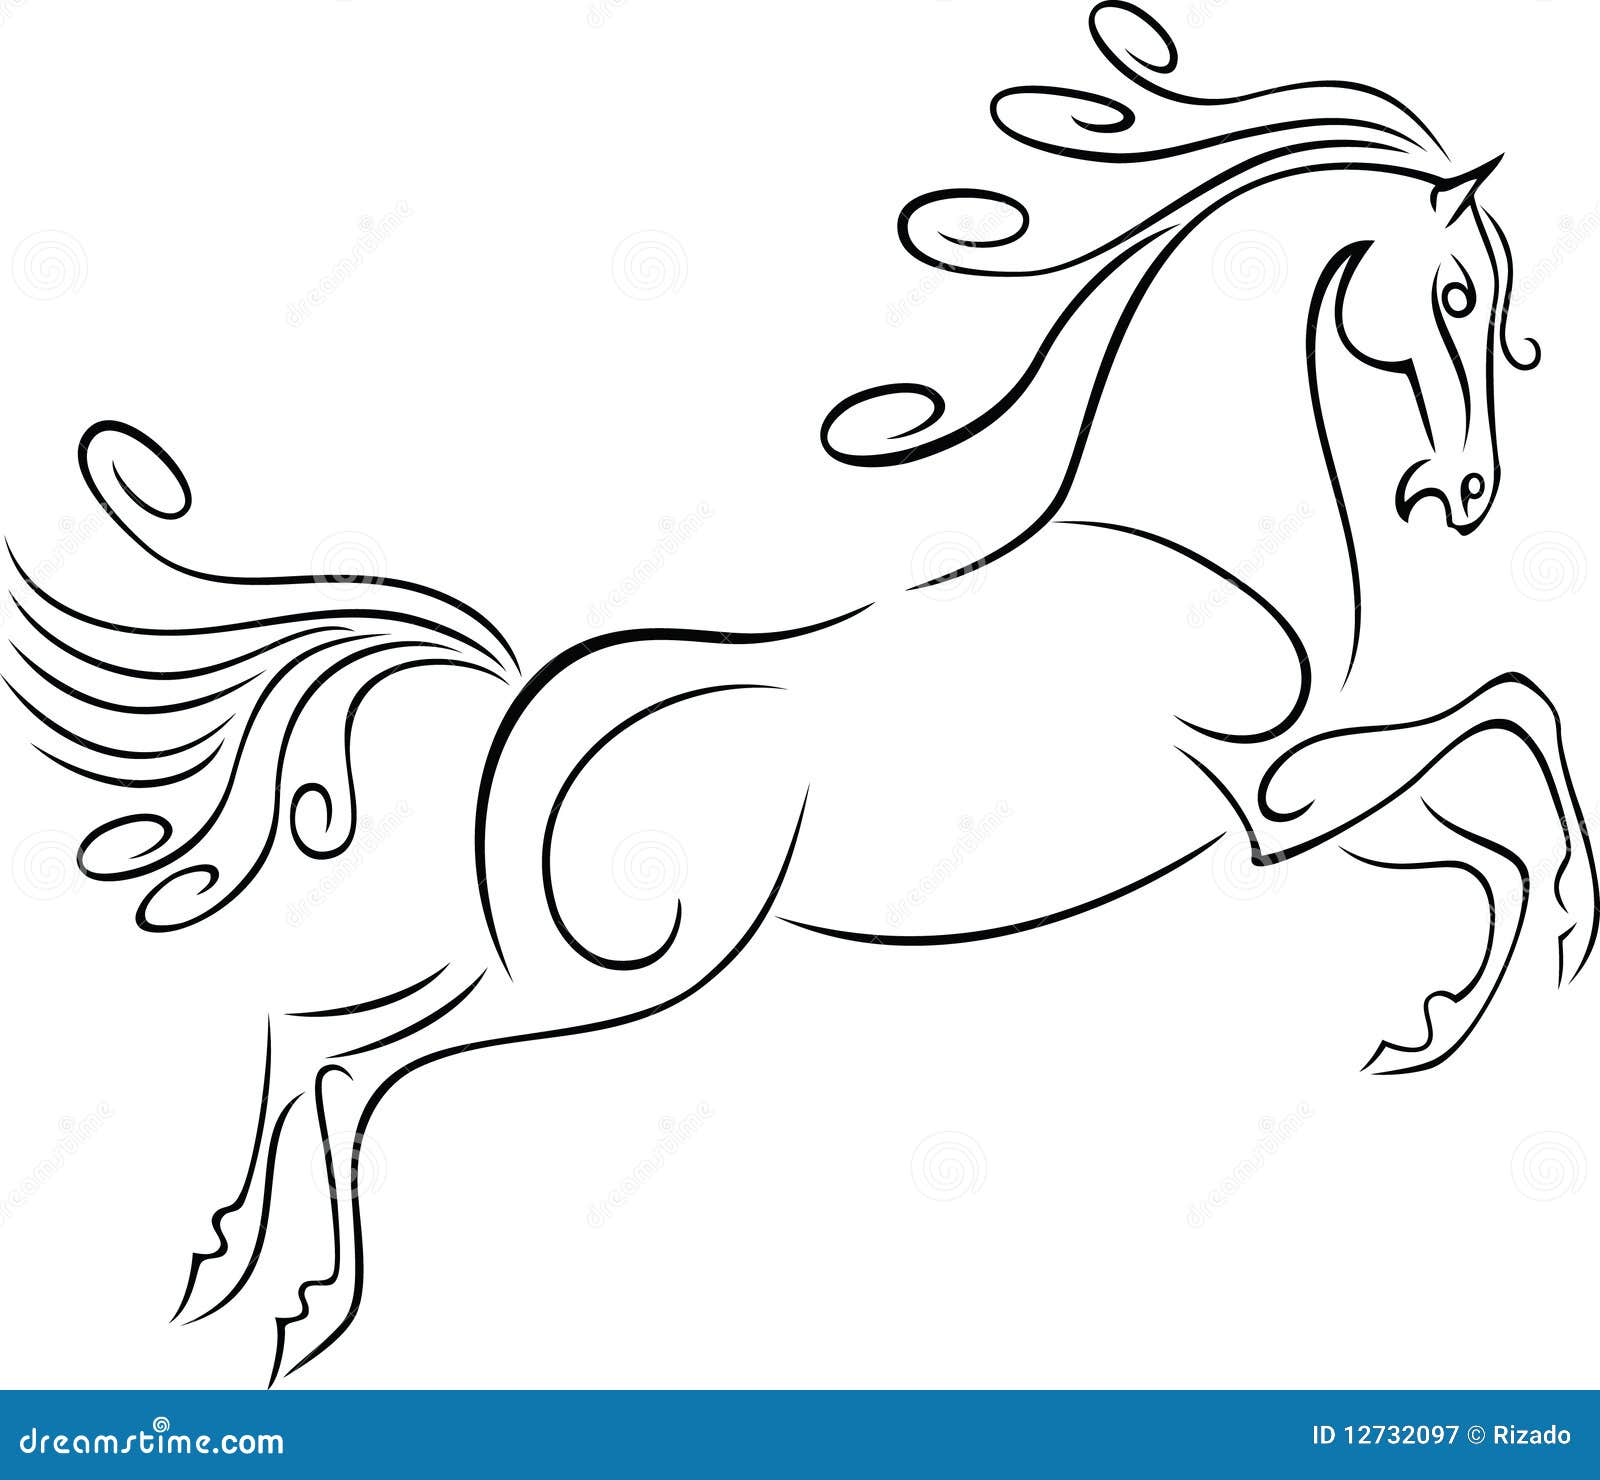 Running Horse Royalty Free Stock Photography - Image: 12732097